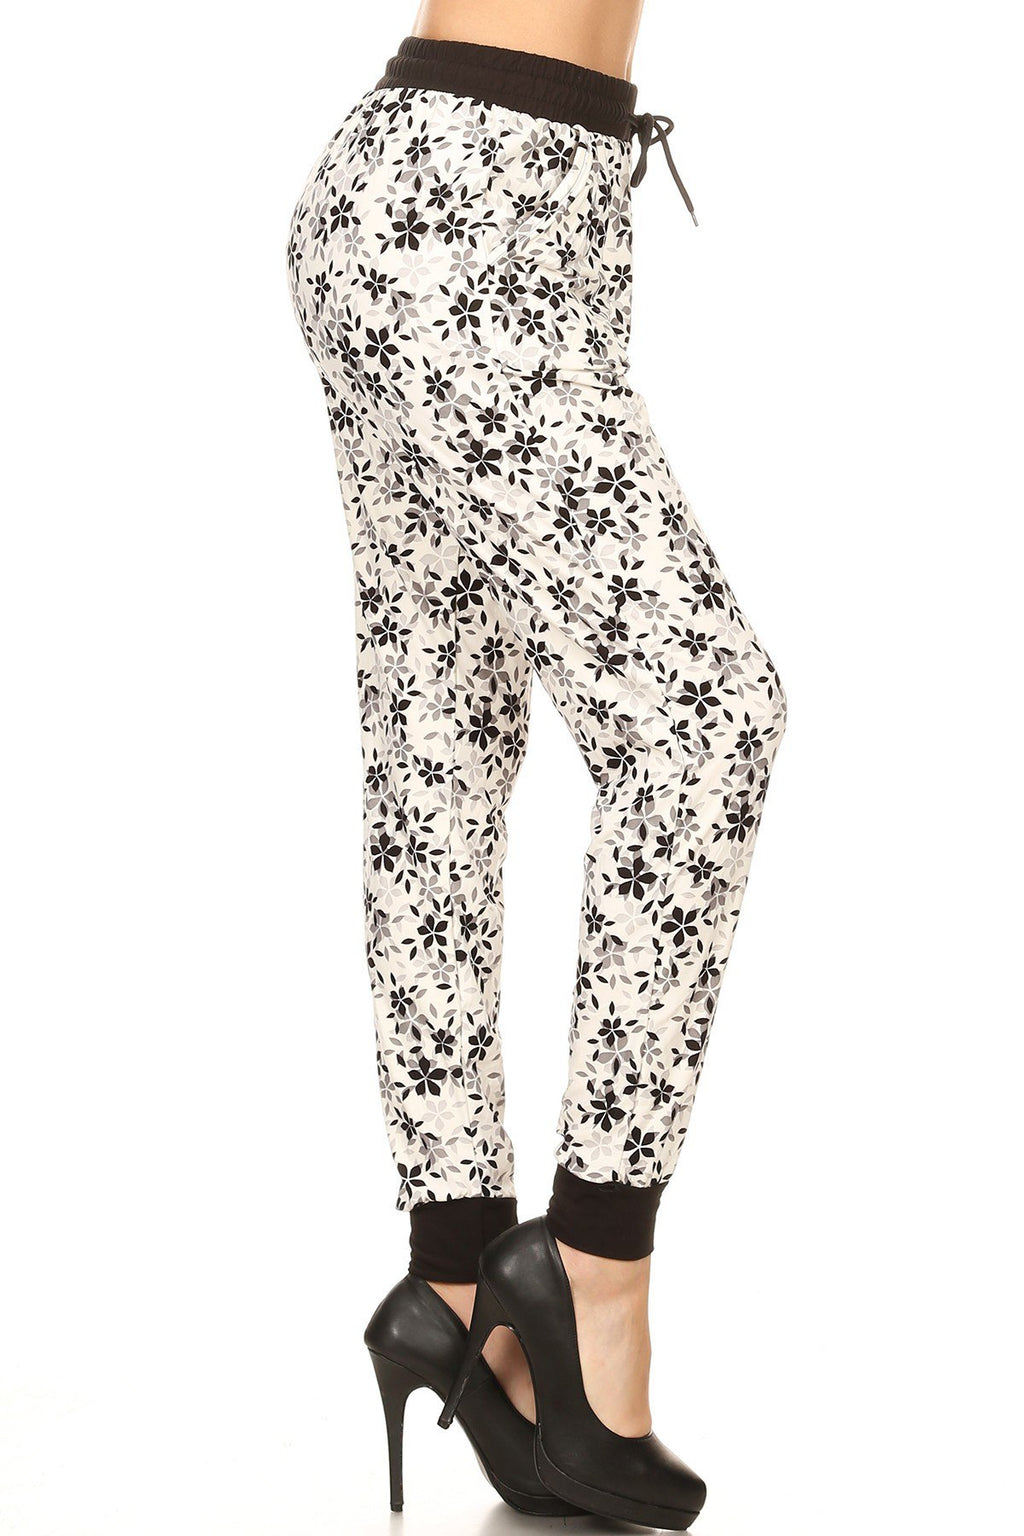 B/W MIXED FLORAL joggers with solid trim, drawstring waistband, waist pockets, and cuffed hems